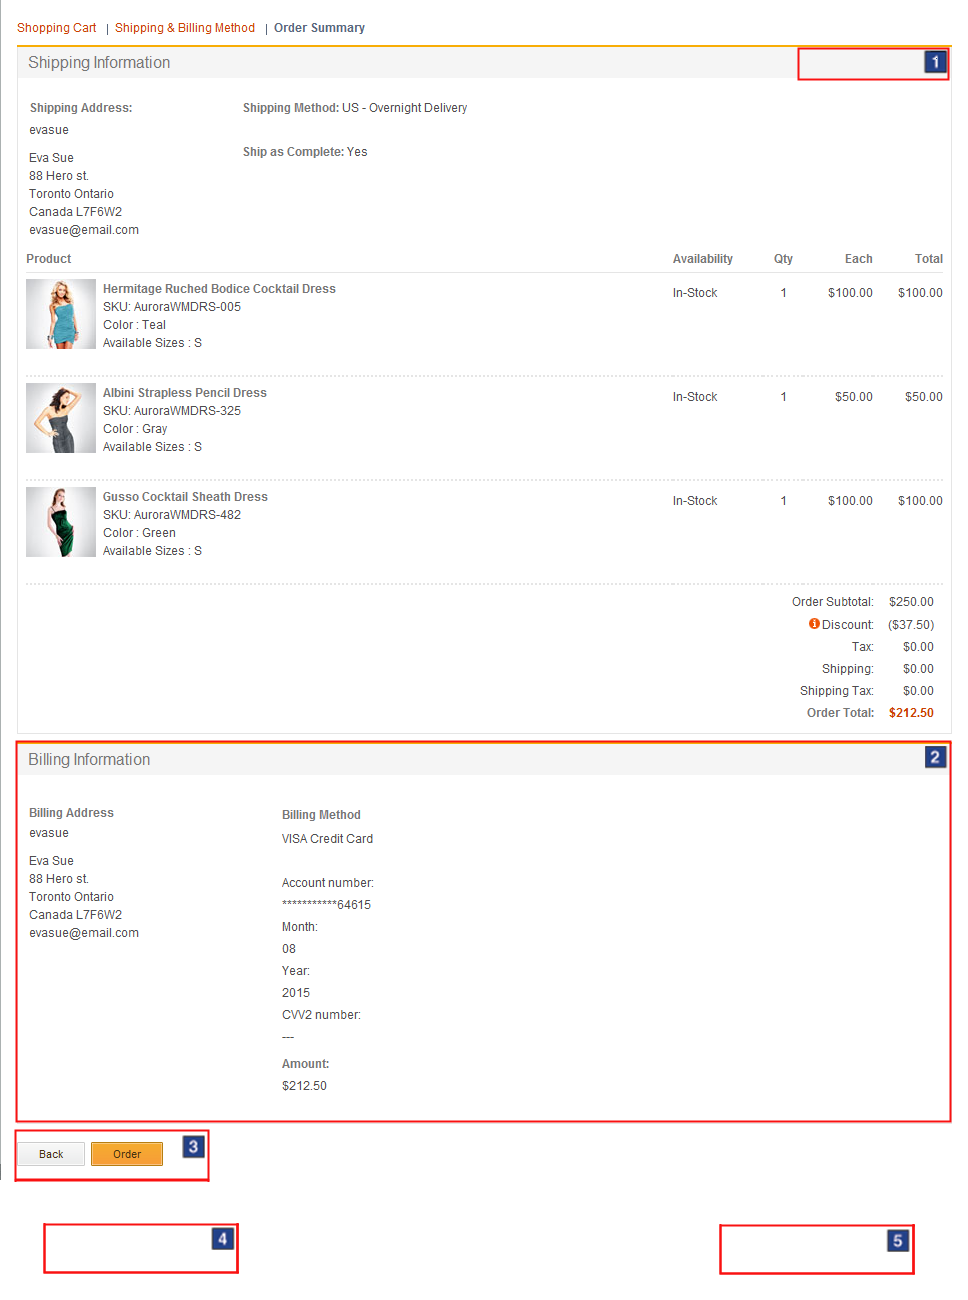 Order summary page: Single shipping and billing addresses screen capture